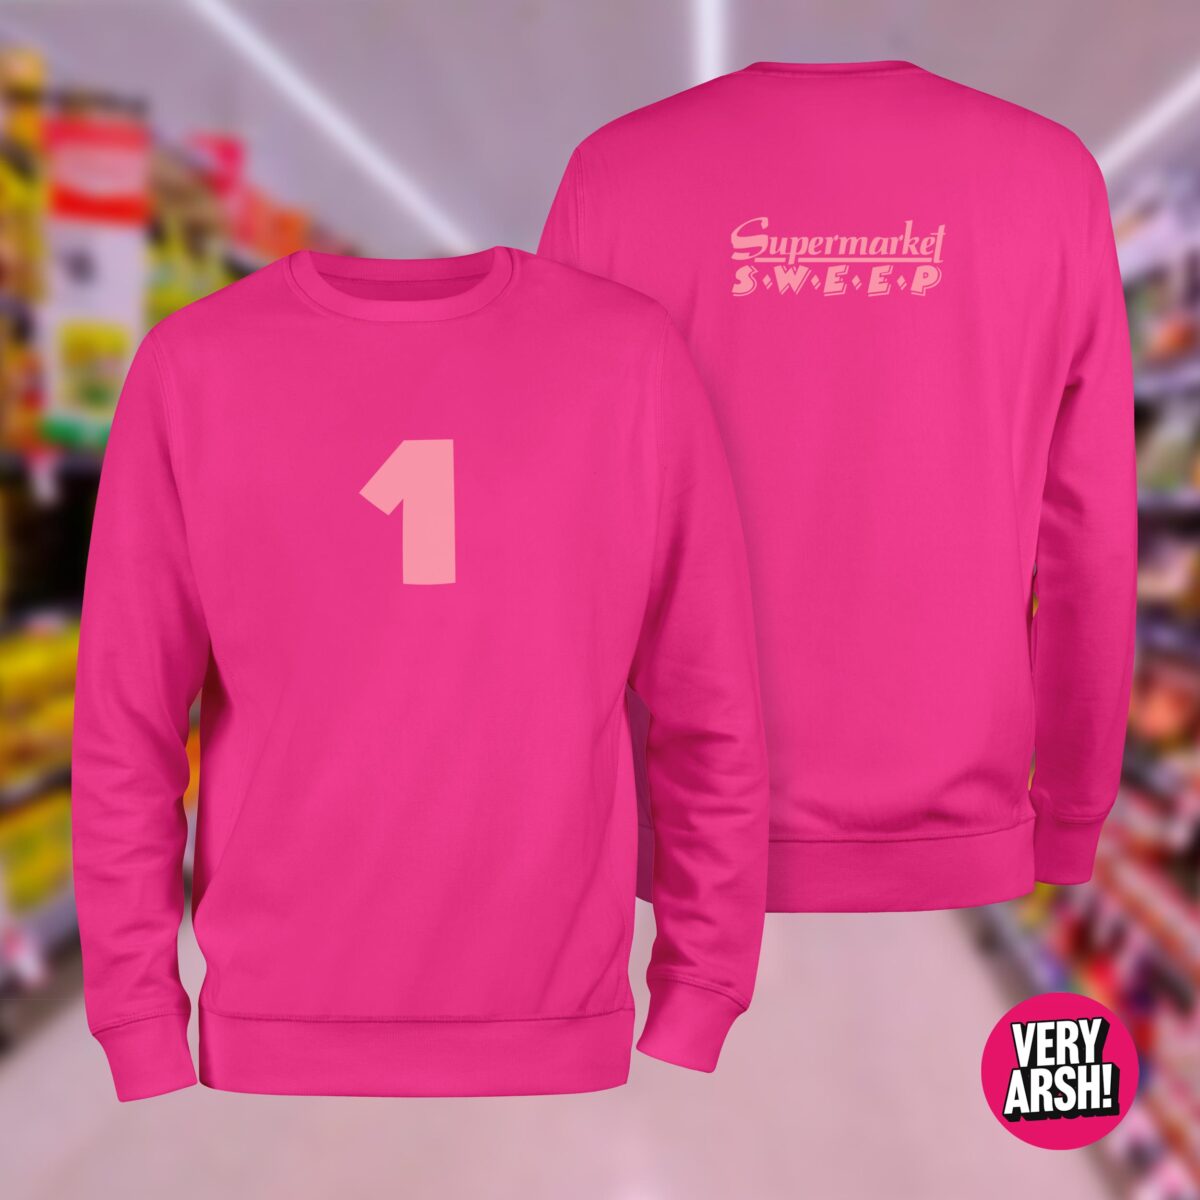 Supermarket Sweep inspired Team Sweaters (Pink)